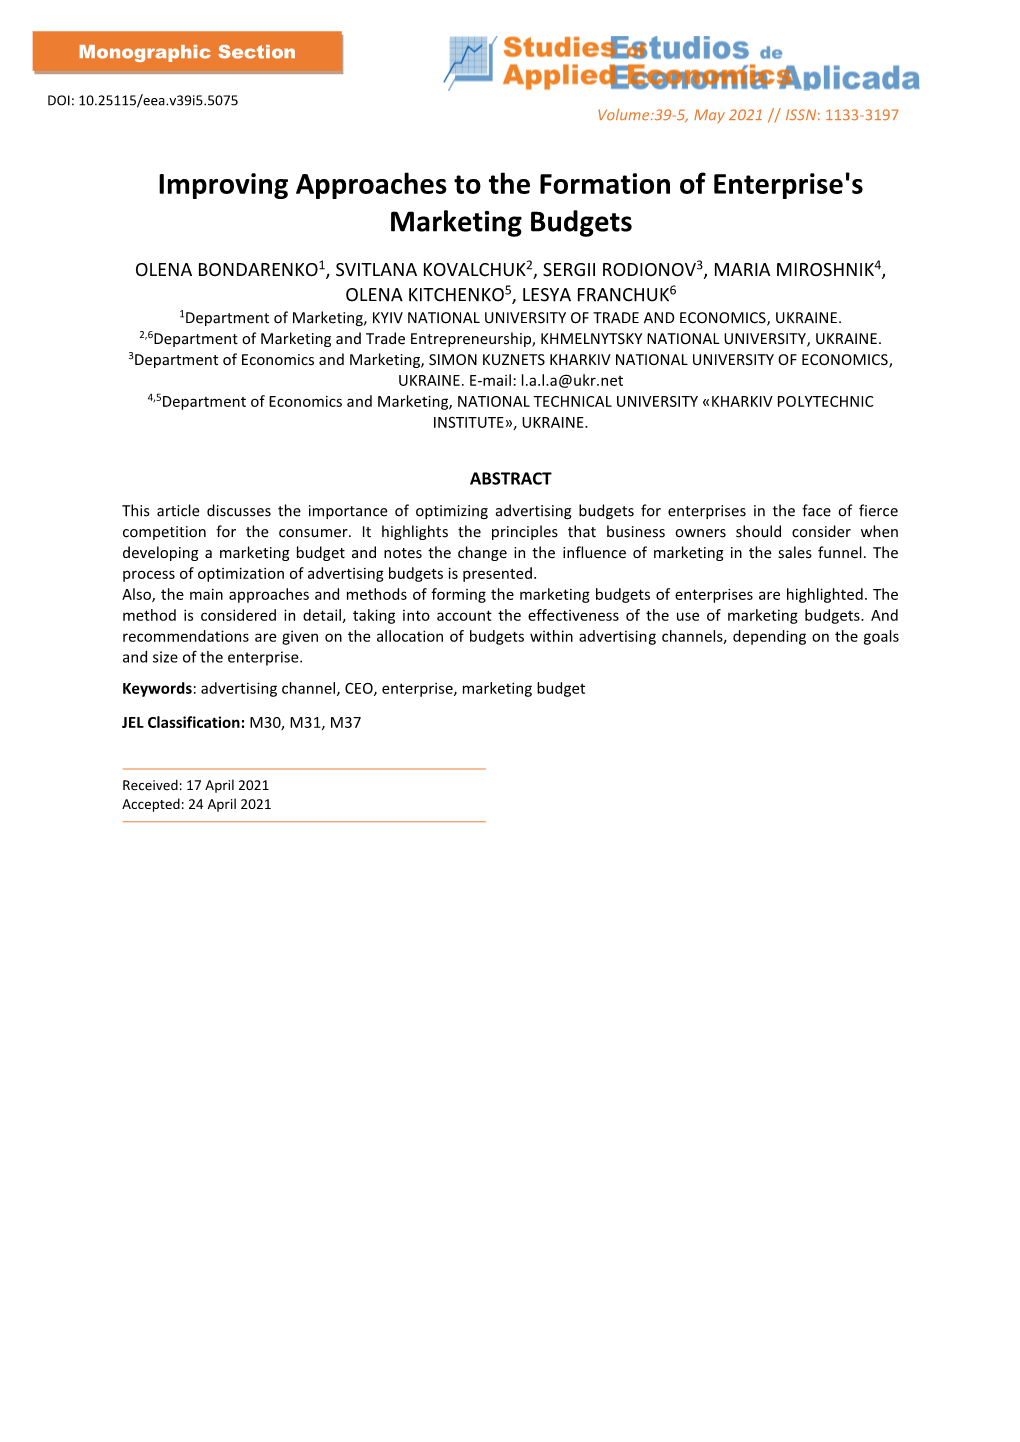 Improving Approaches to the Formation of Enterprise's Marketing Budgets